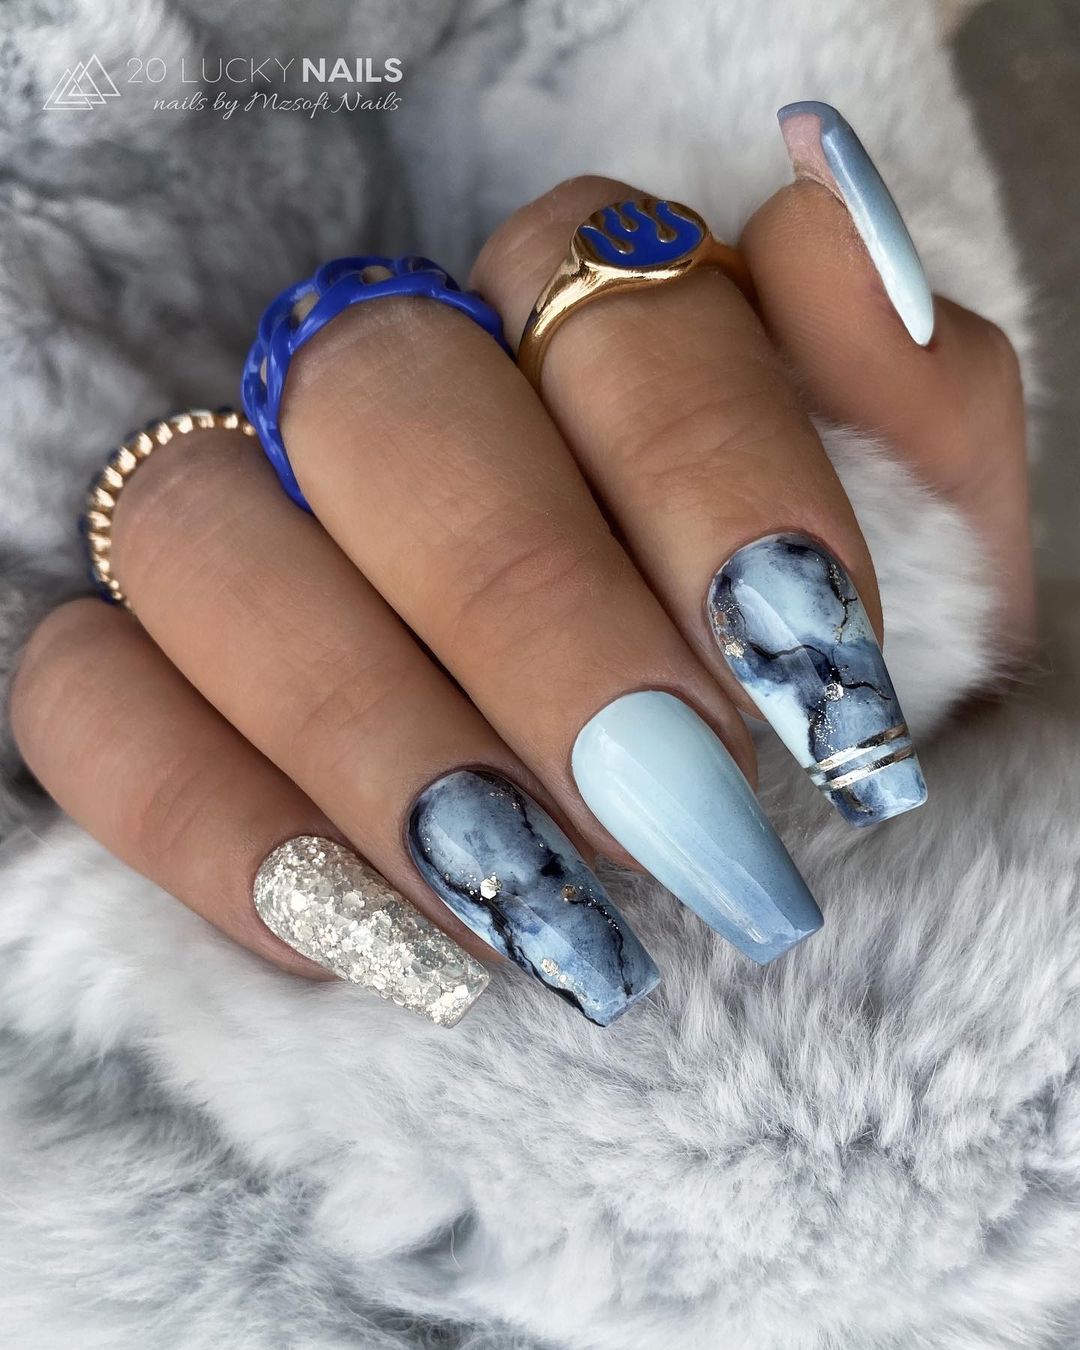 Grey Coffin Acrylic Nails with Marble Design